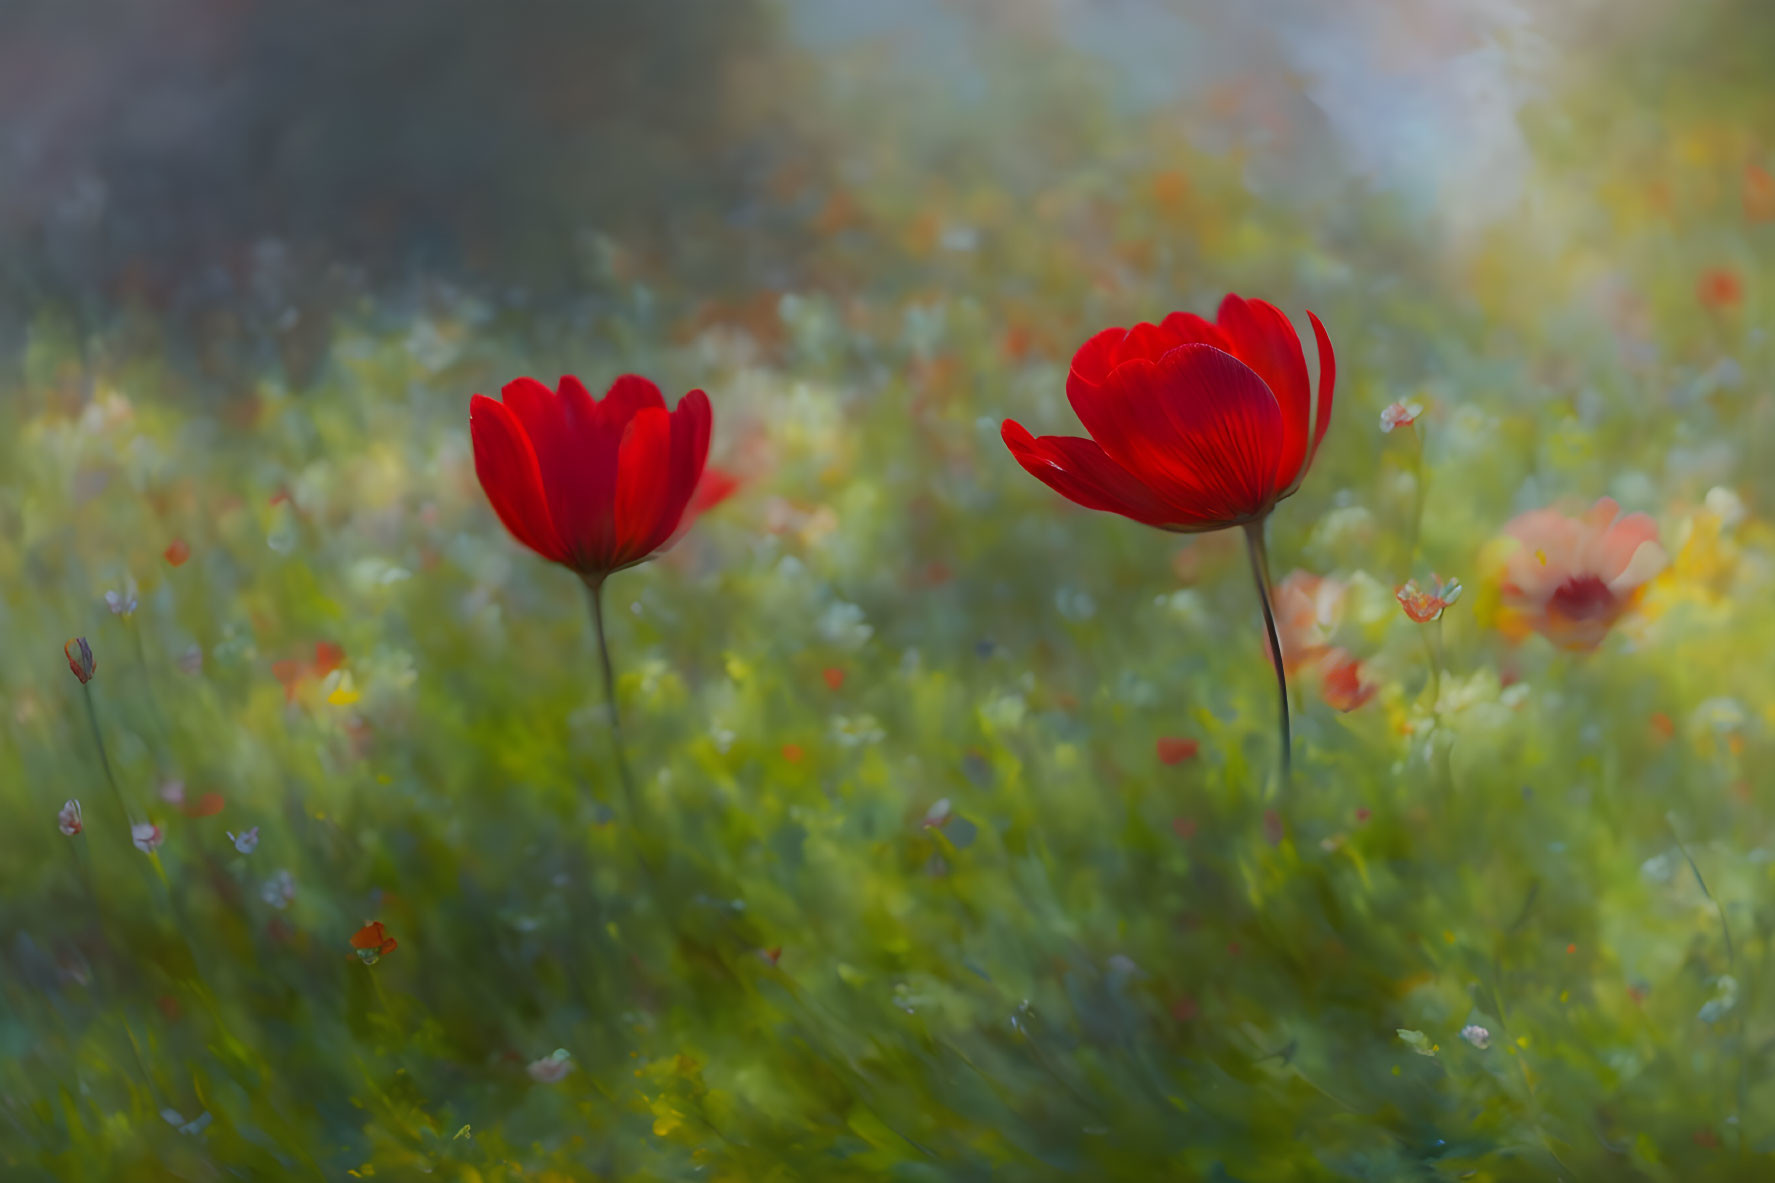 Vibrant red poppies in blurred green field with wildflowers